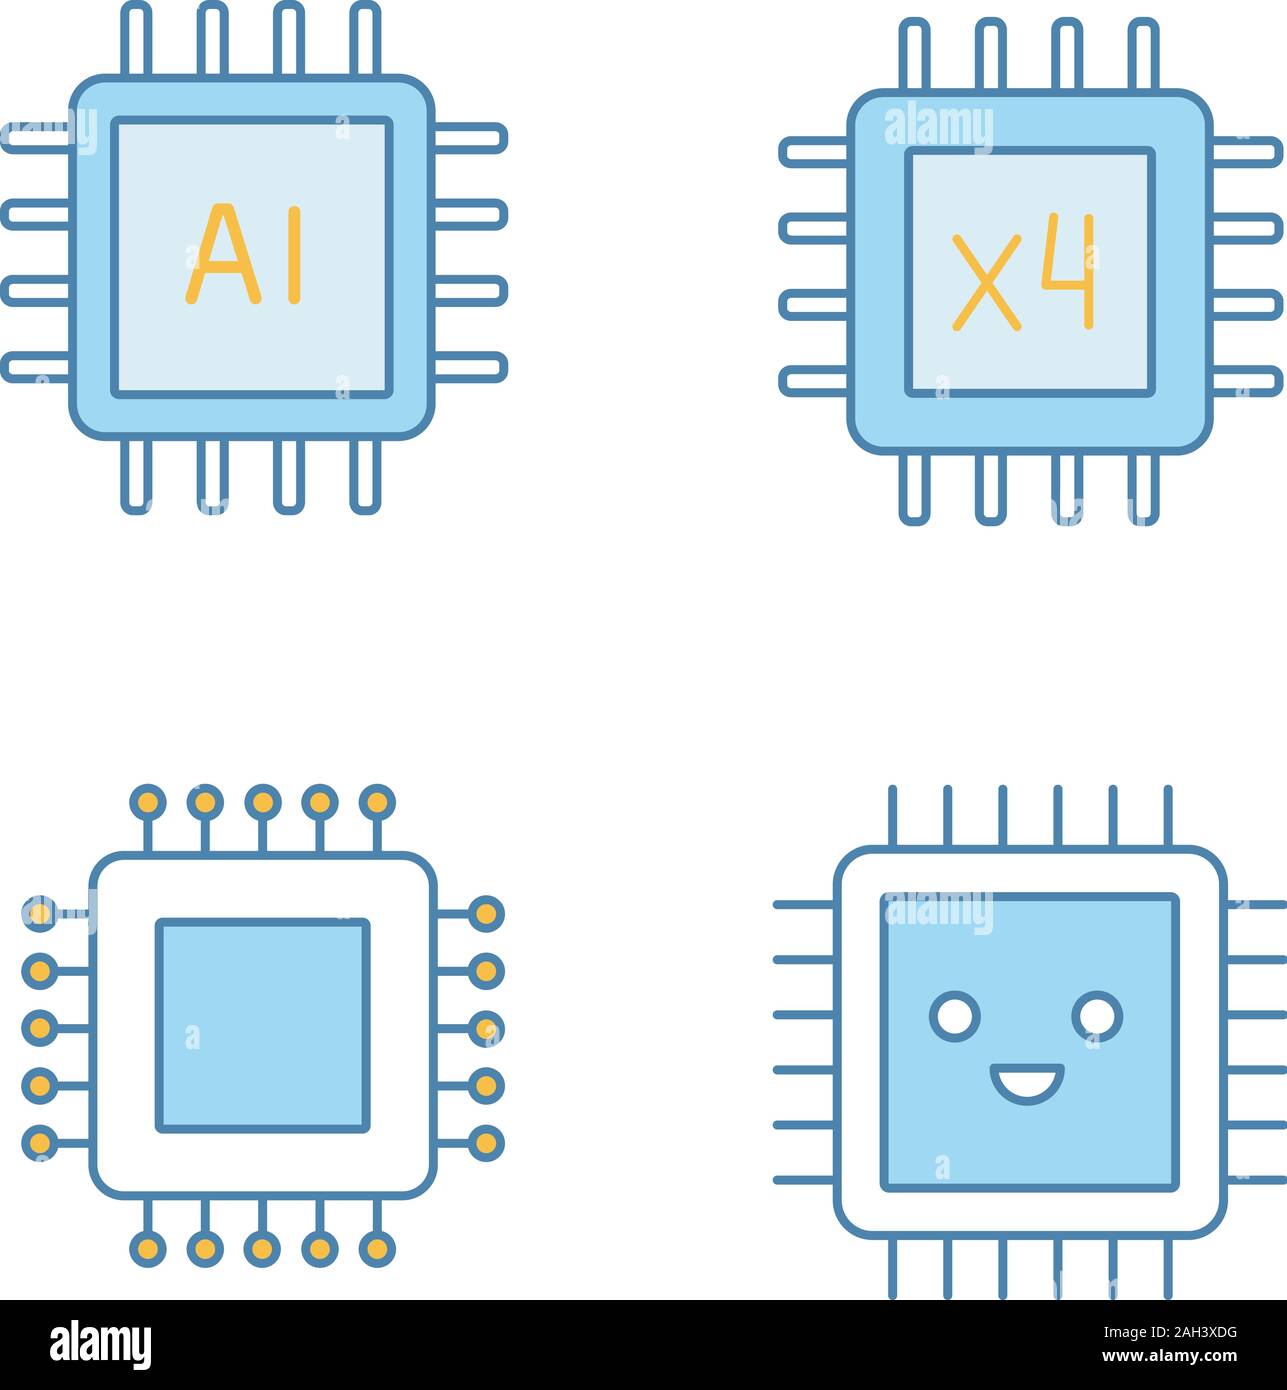 Processors color icons set. Chip, integrated circuit for ai system, smiling microprocessor, quad core processor. Isolated vector illustrations Stock Vector